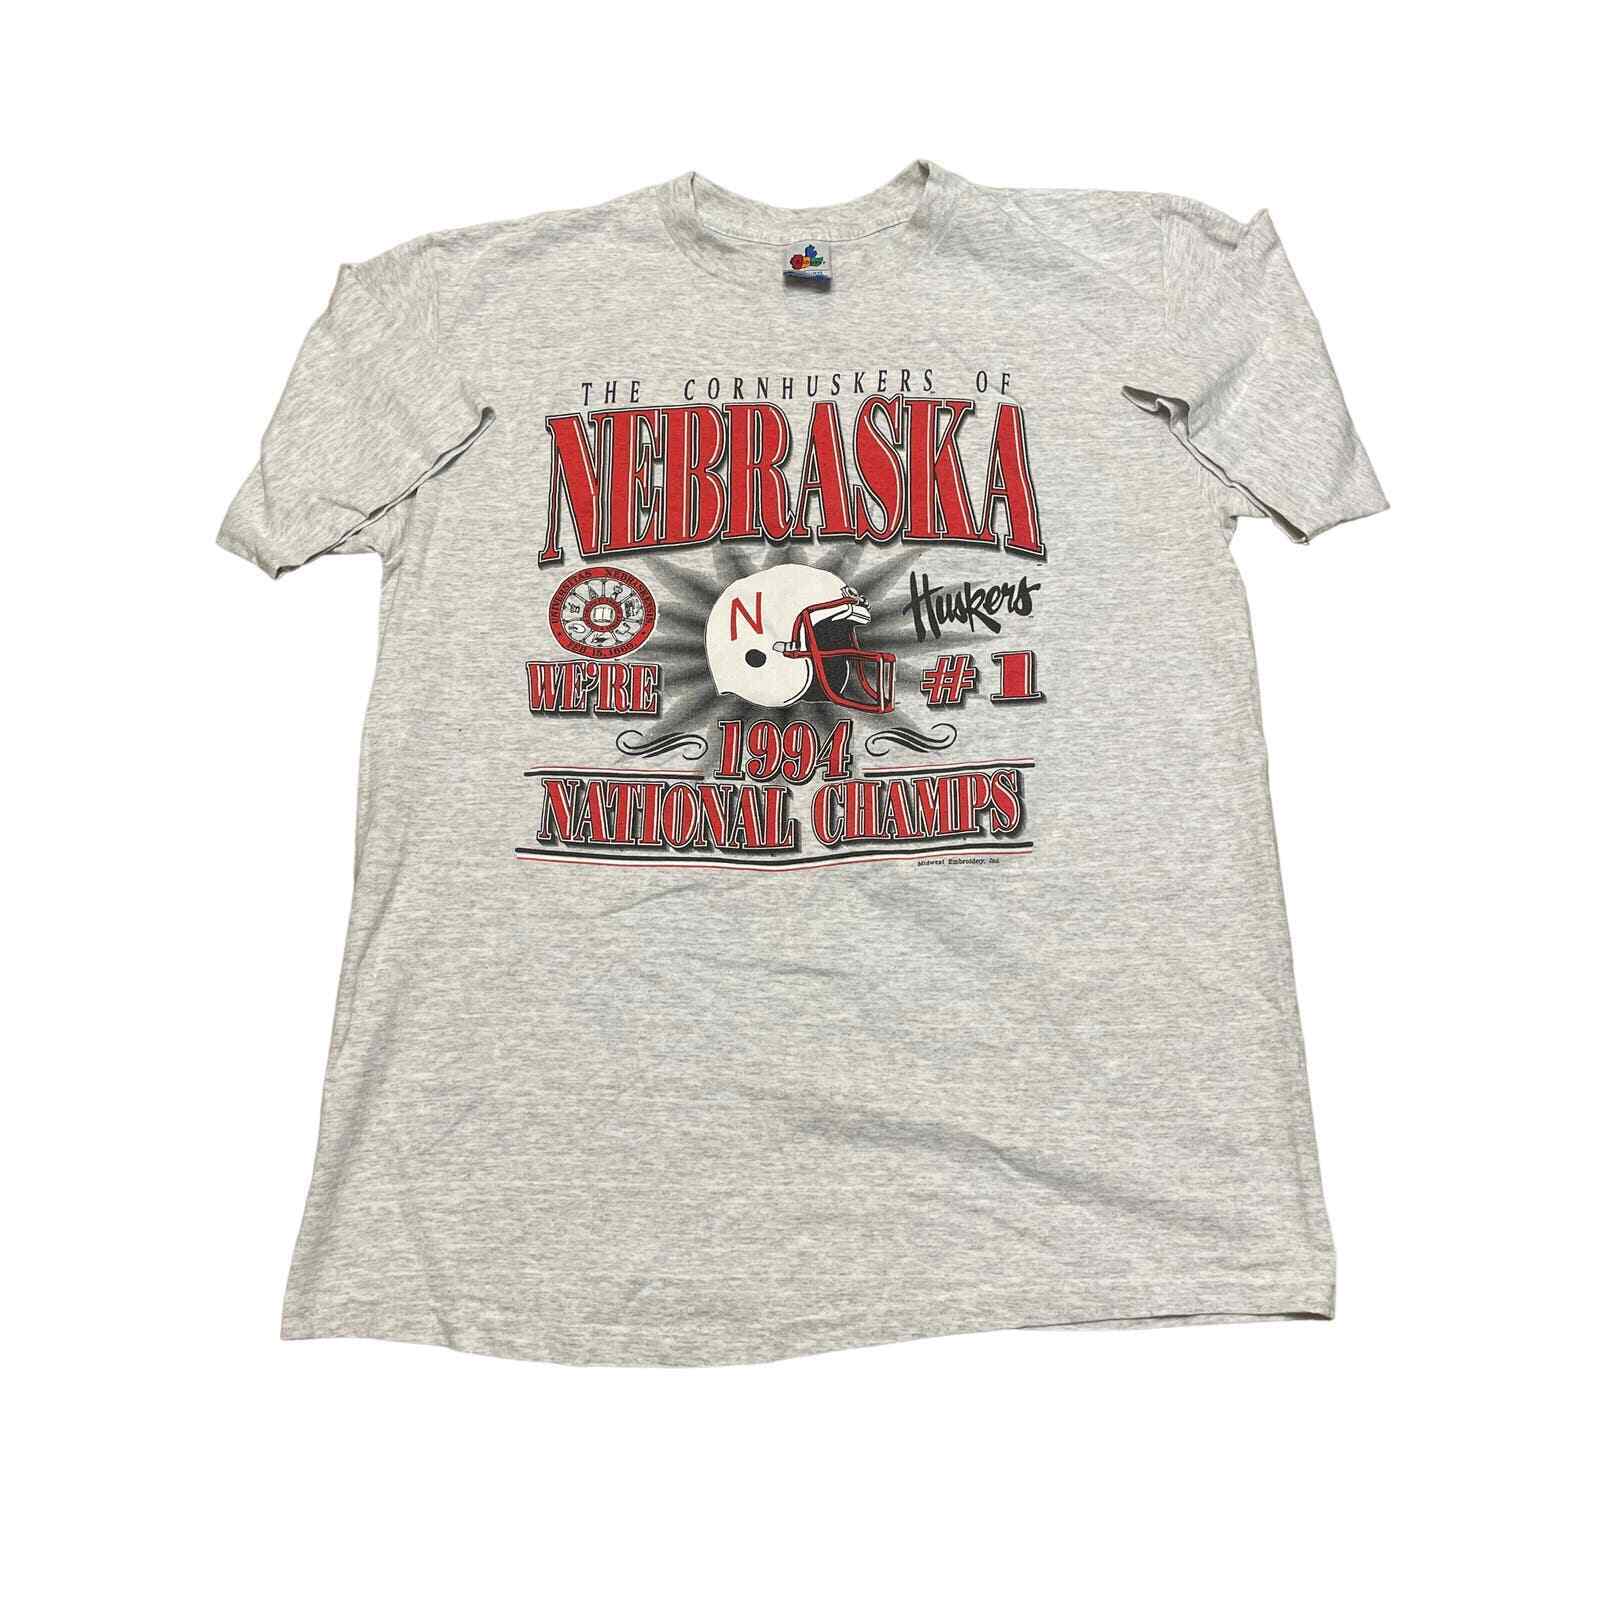 Vintage Midwest Embroidery Nebraska Huskers T-shirt Adult Size L Gray